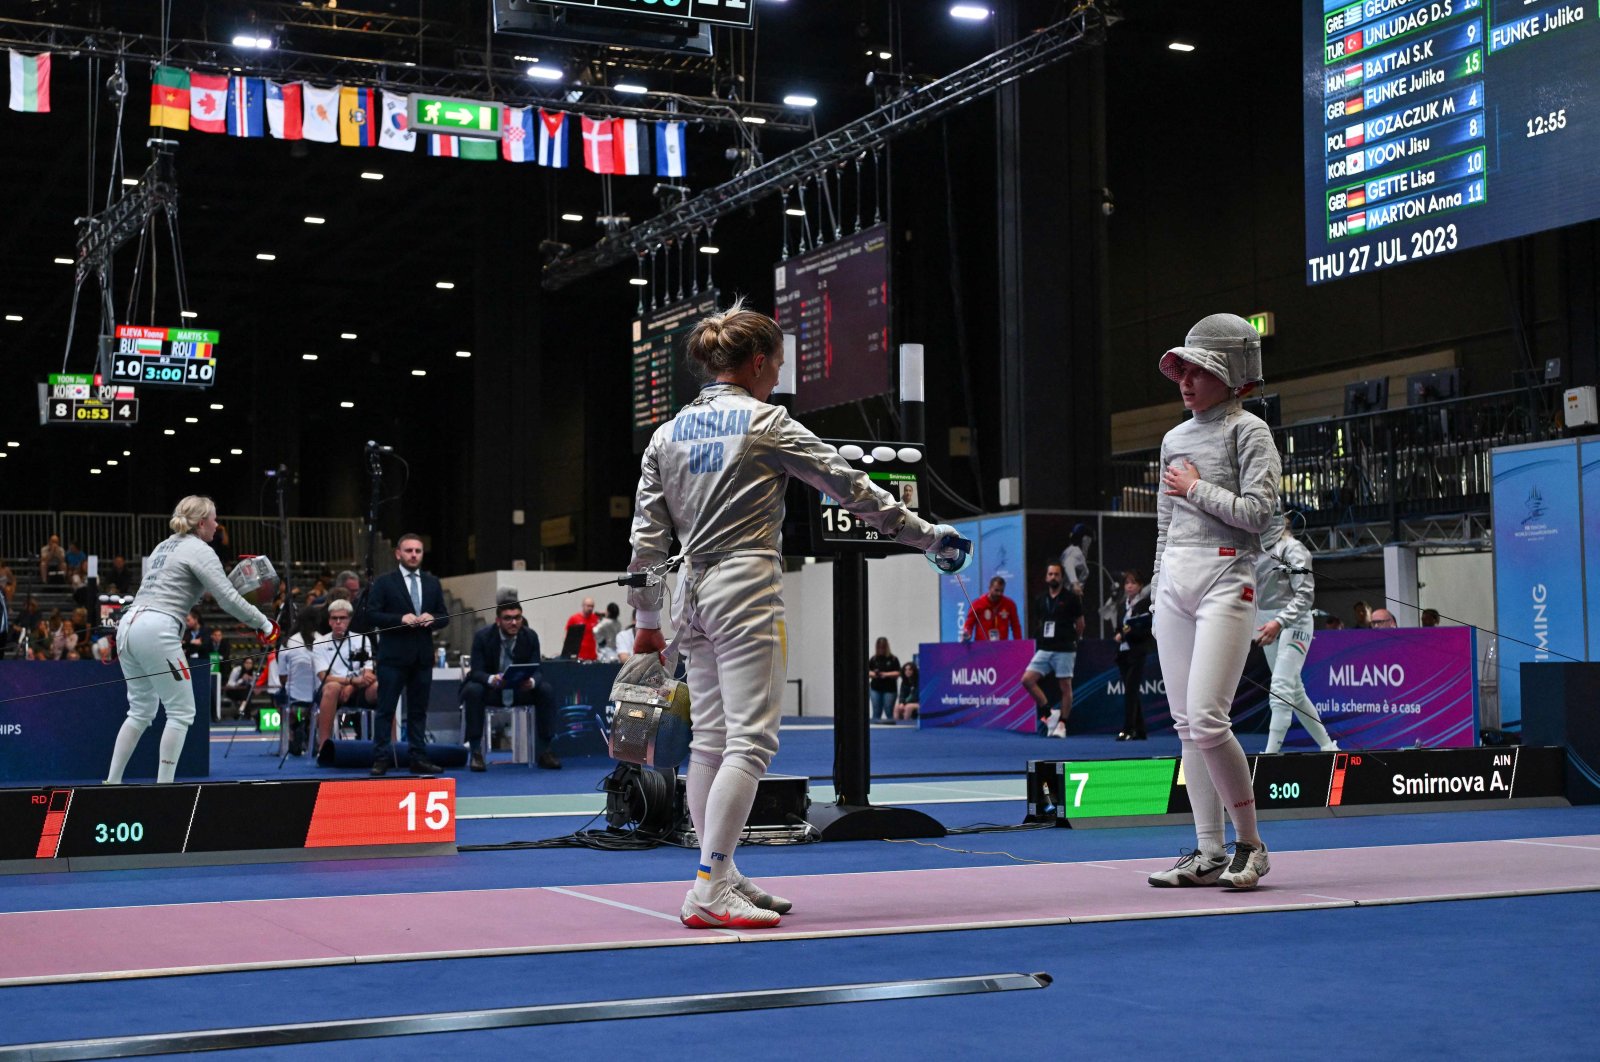 Ukraine&#039;s Olha Kharlan (L) gestures as she refuses to shake hands with Russia&#039;s Anna Smirnova, registered as an Individual Neutral Athlete (AIN), after she defeated her during the Sabre Women&#039;s Senior Individual qualifiers, as part of the FIE Fencing World Championships at the Fair Allianz MI.CO, Milan, Italy, July 27, 2023. (AFP Photo)